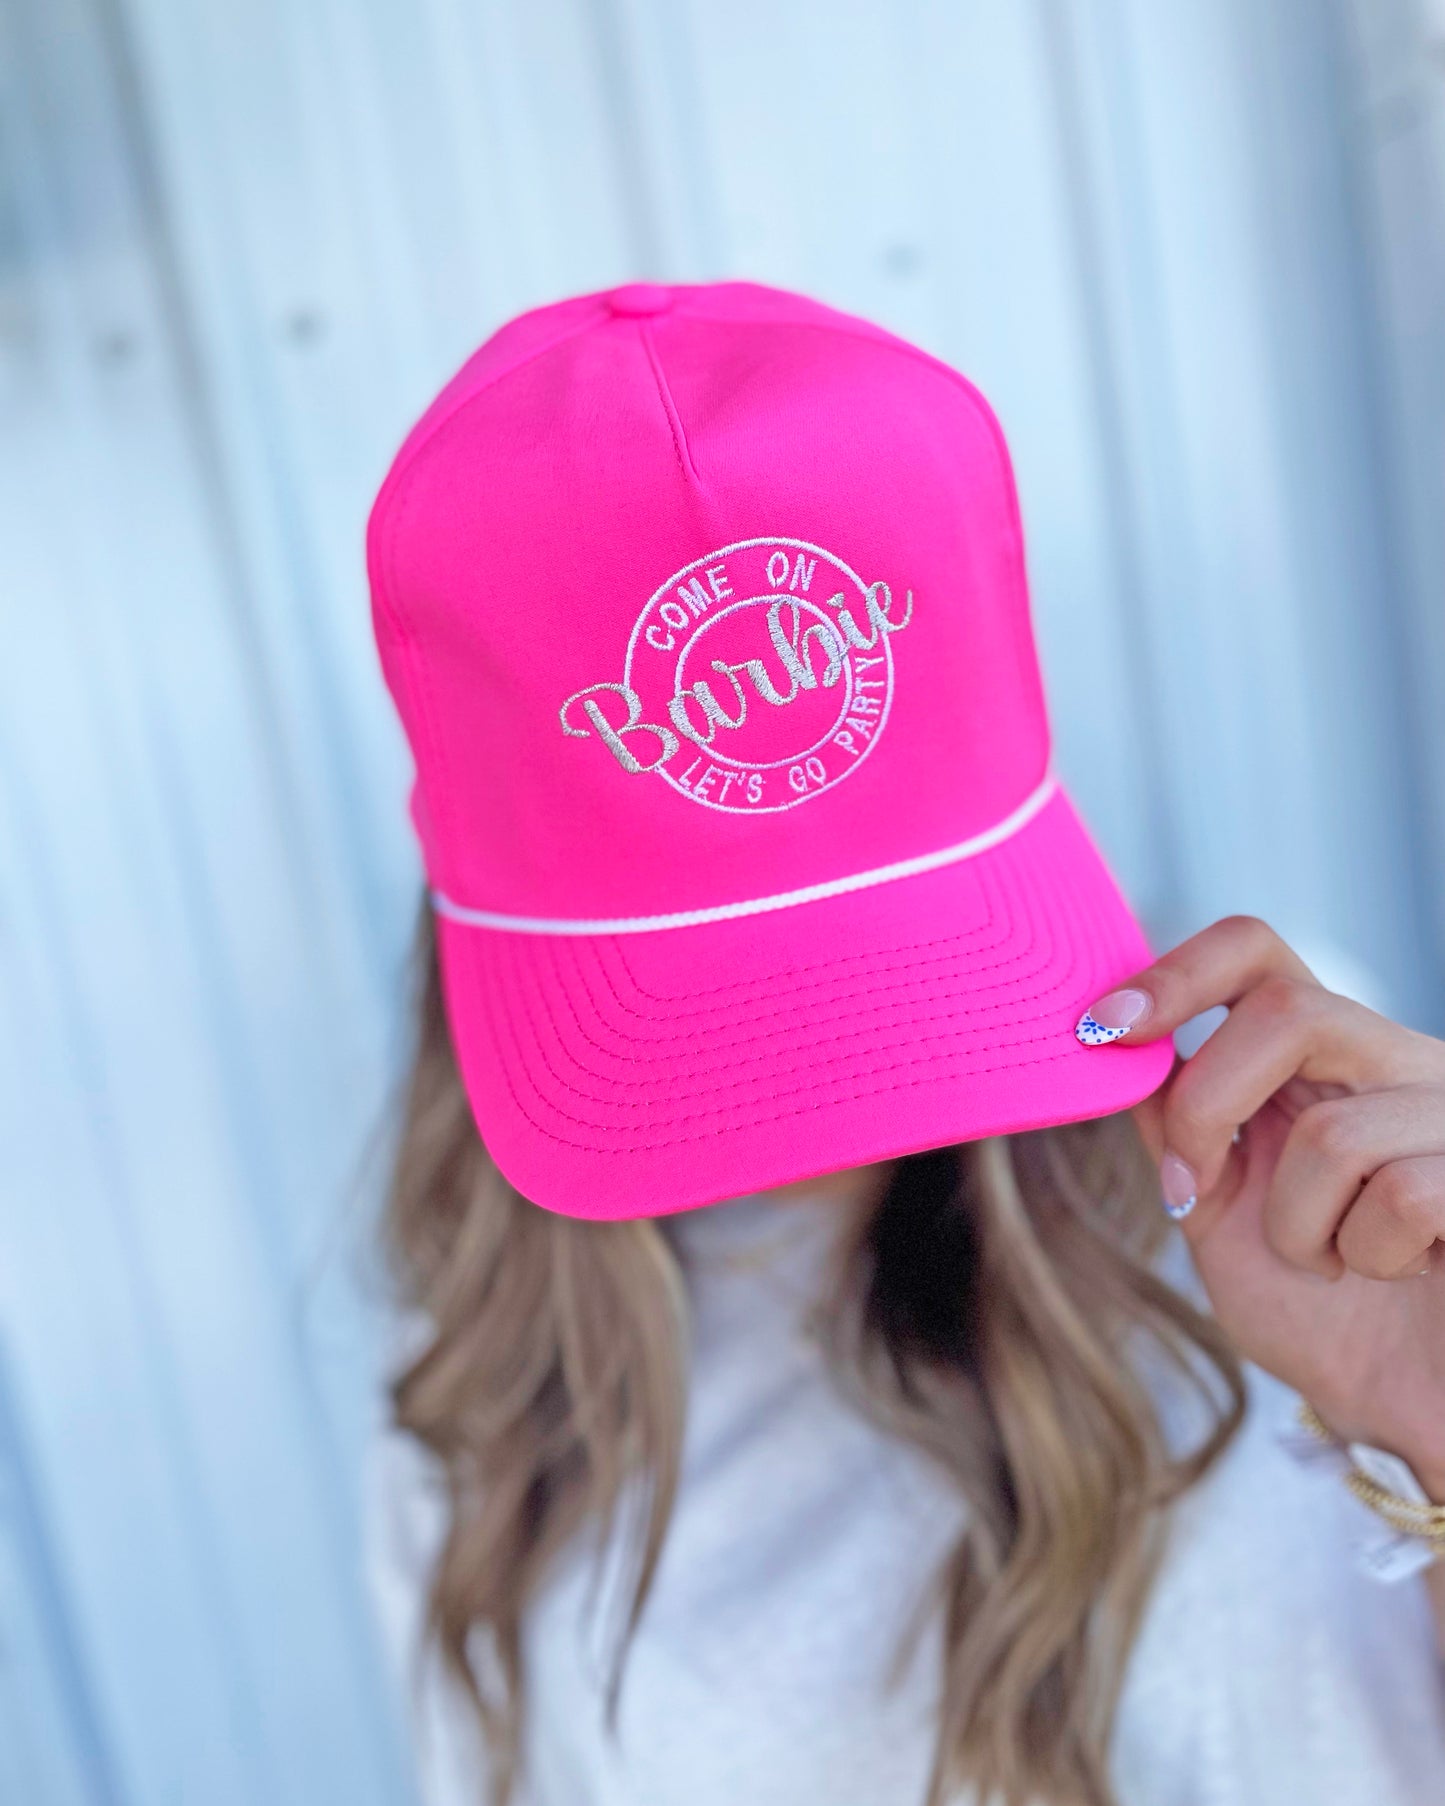 Come On Barbie Neon Pink Cap